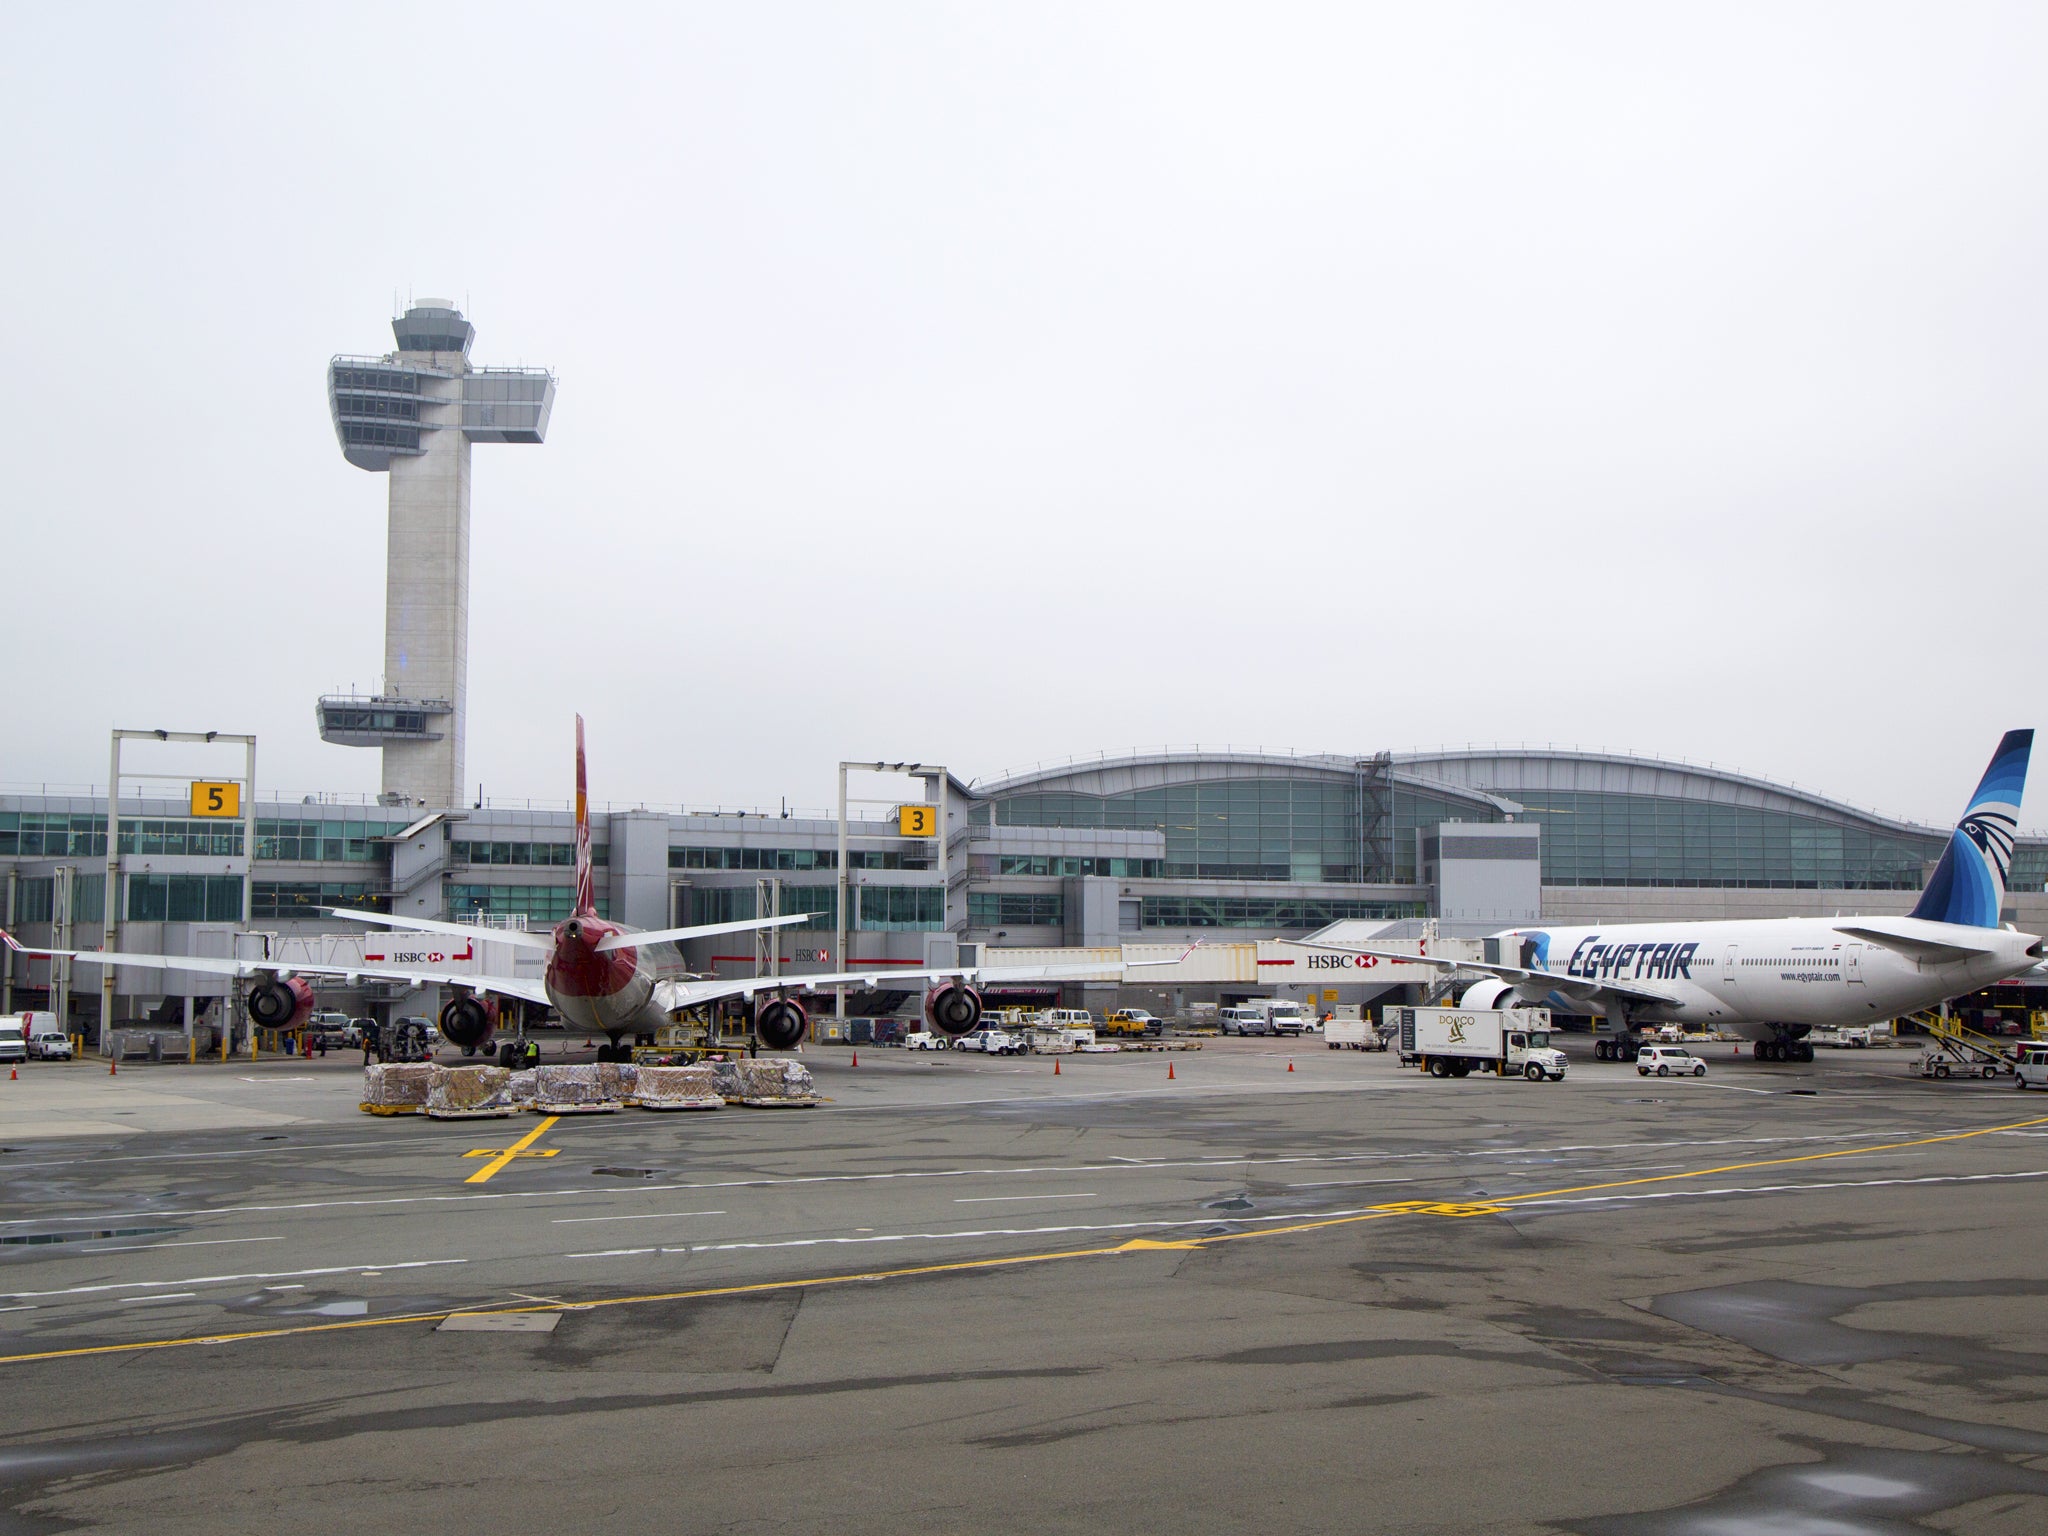 JFK airport was among the airports threatened